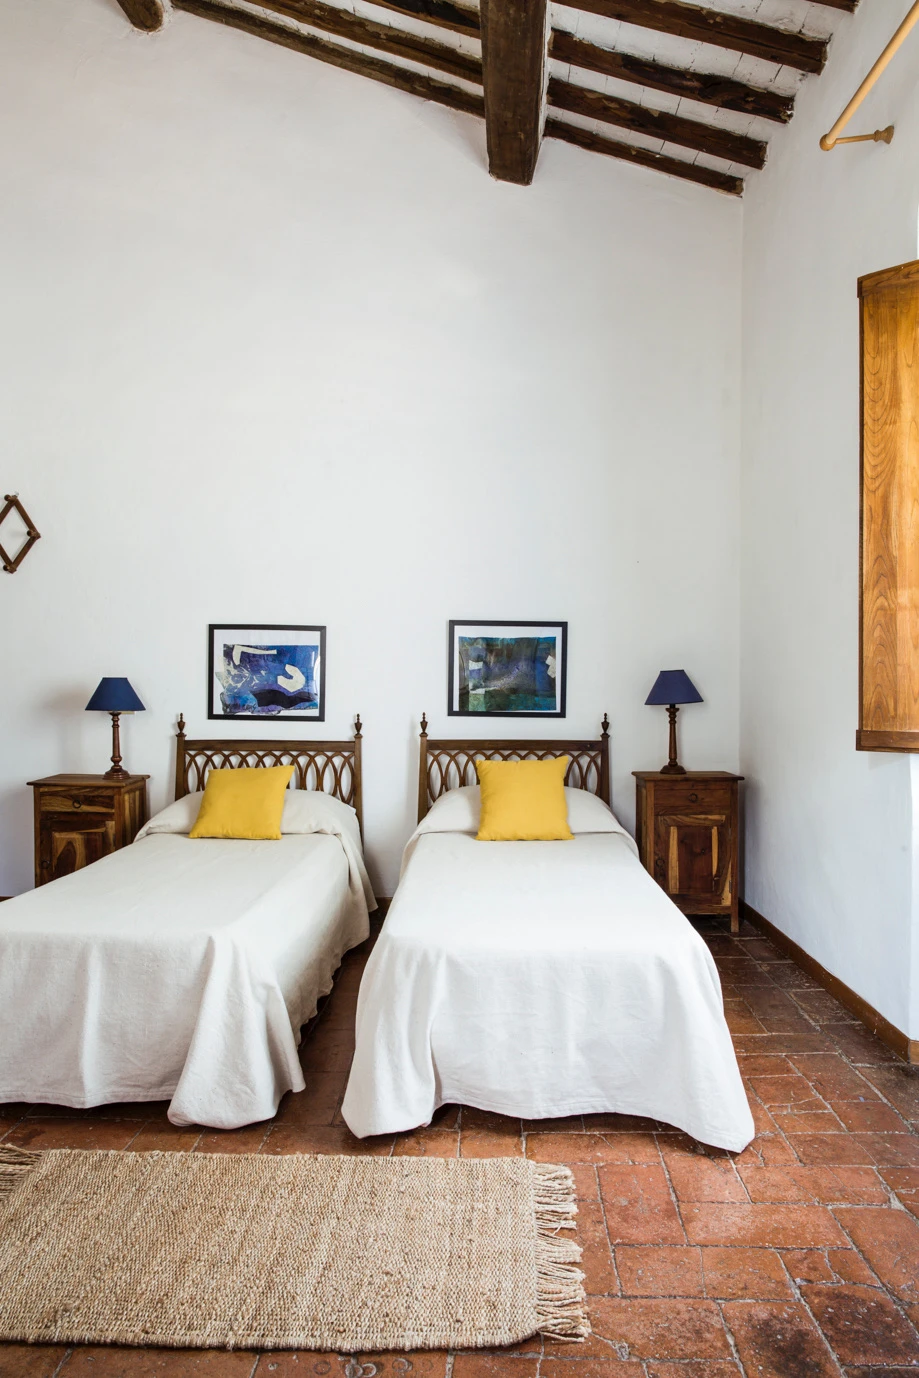 Bedroom in a restored thirteenth century farm in the heart of Tuscany. Connect with nature in a beautifully tranquil spot.